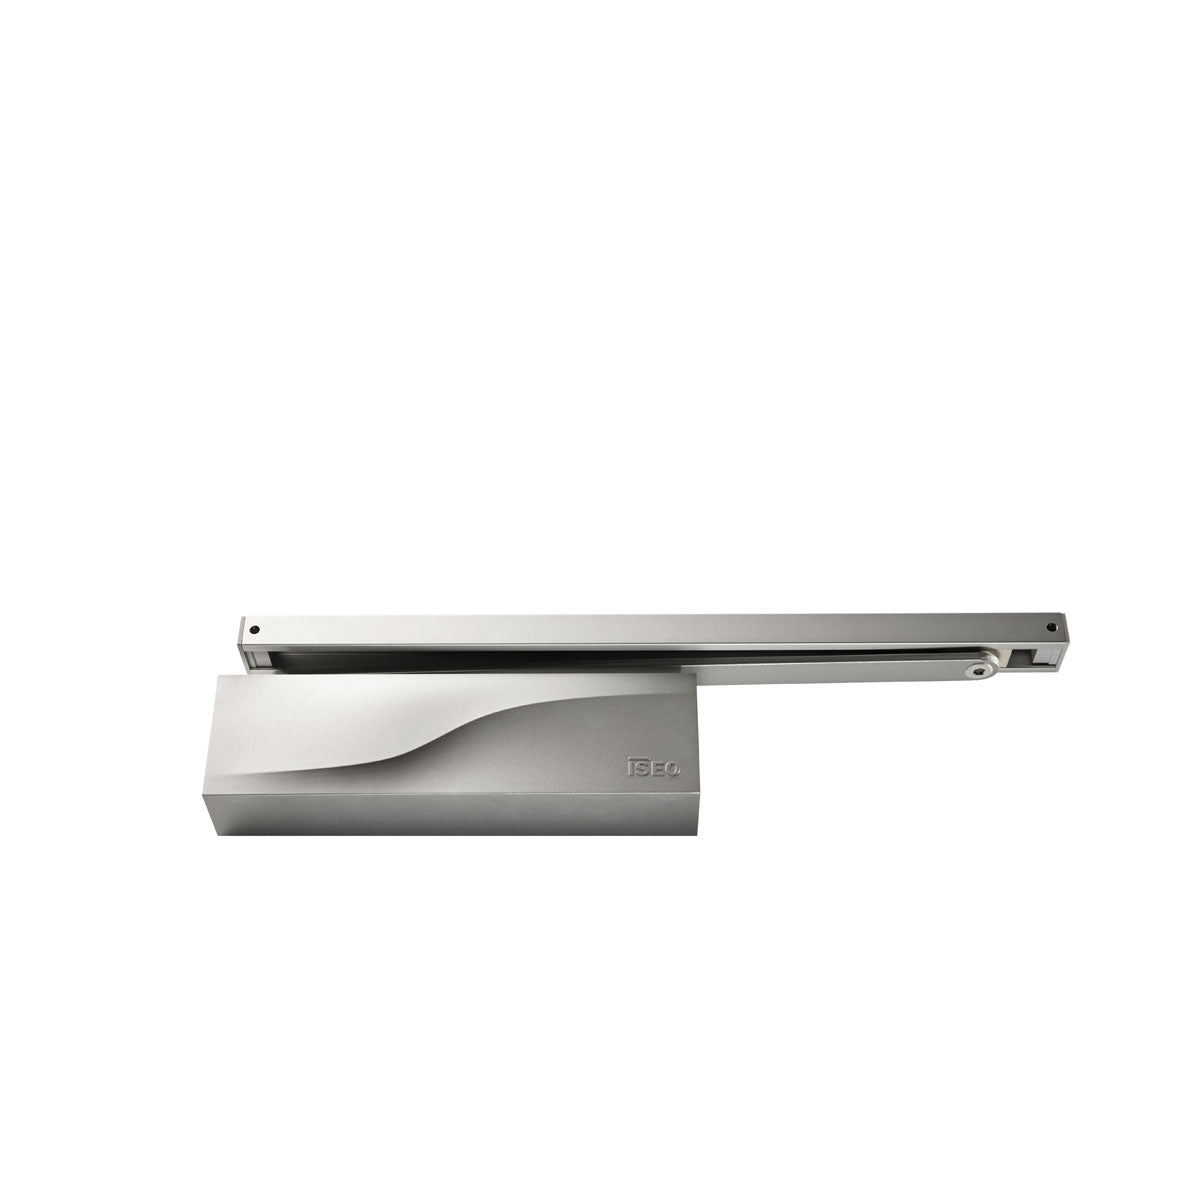 IS65 - ISEO Sliding arm door closer (force 3)